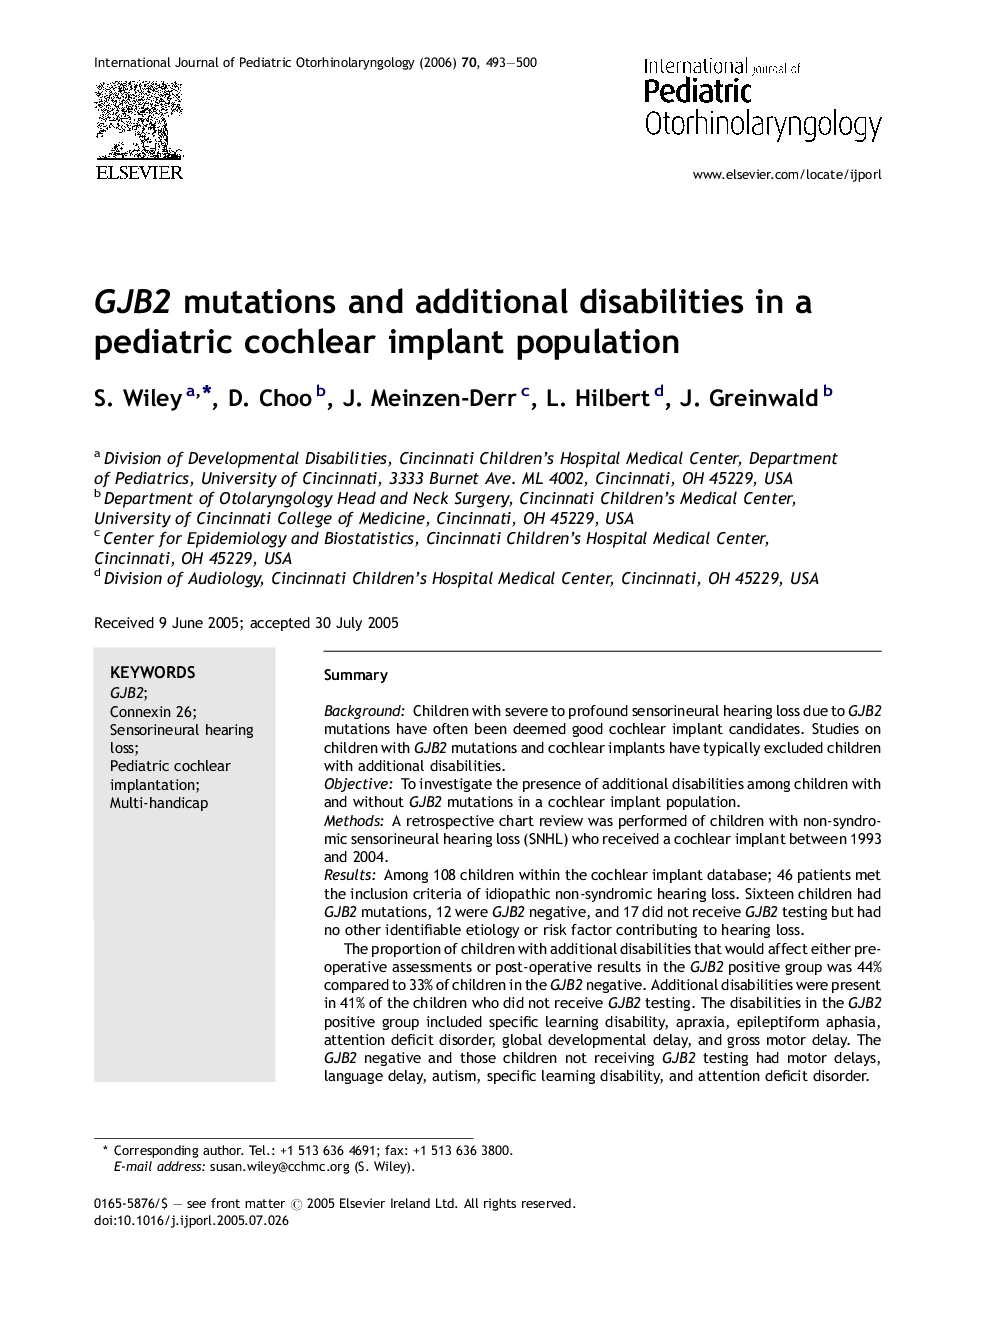 GJB2 mutations and additional disabilities in a pediatric cochlear implant population